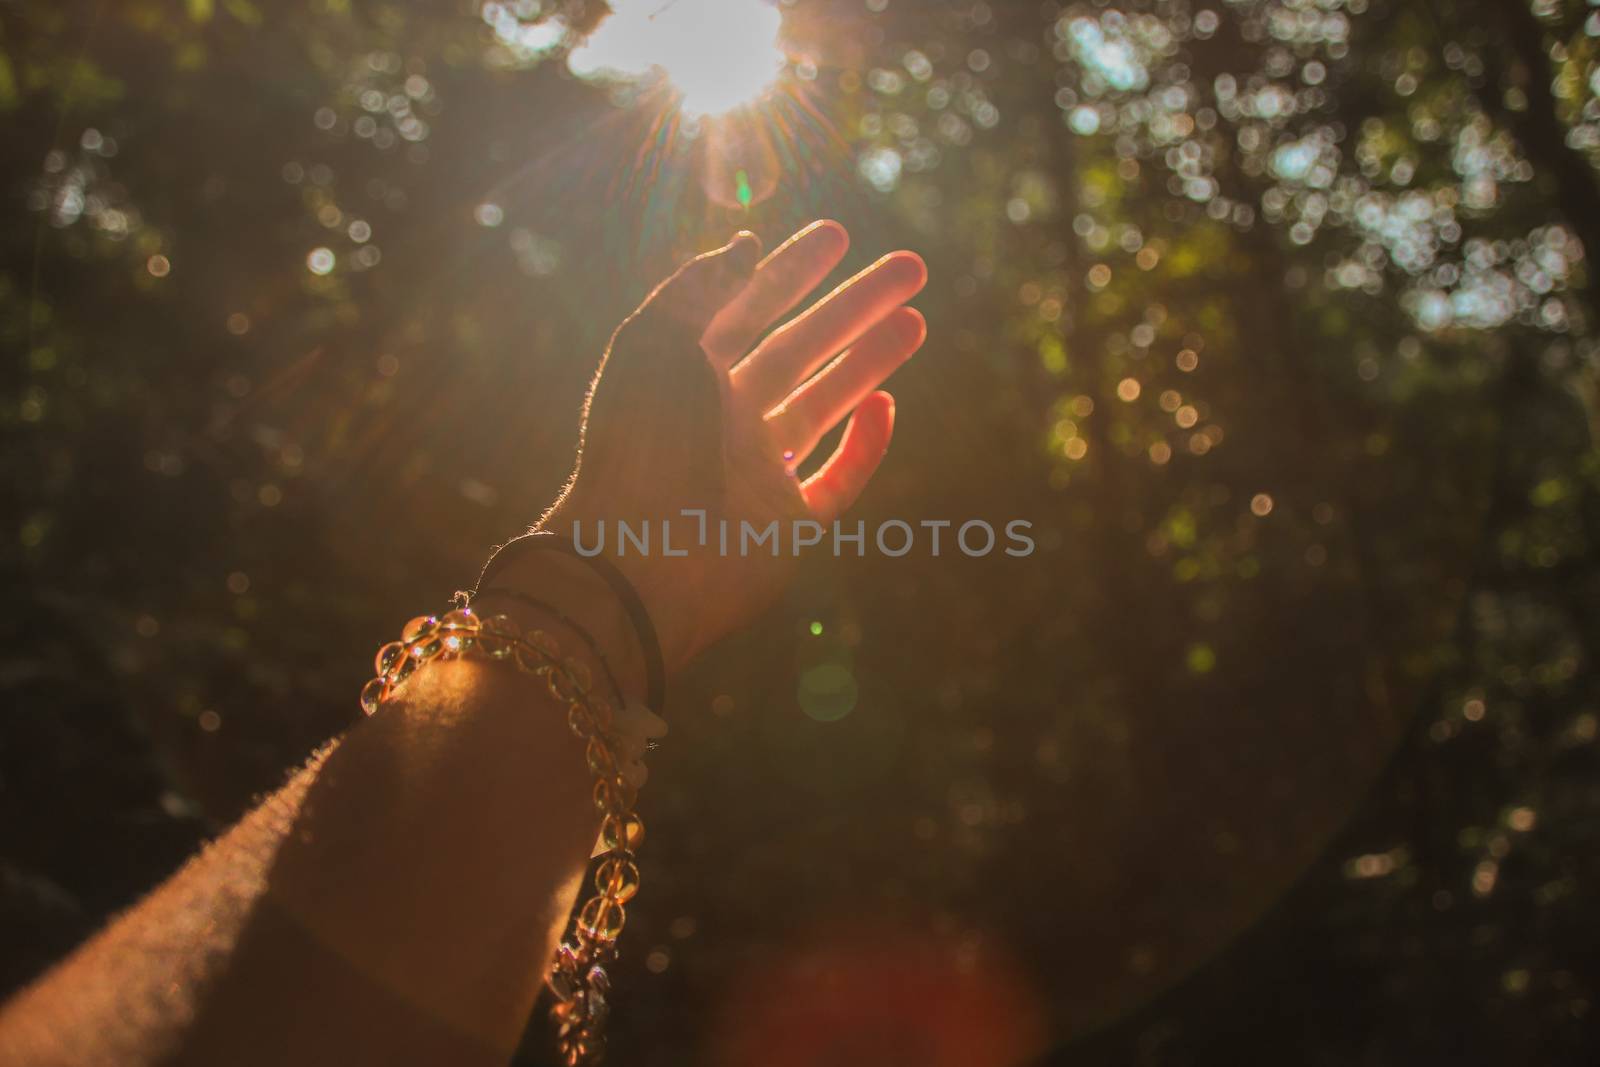 Hands to the Light by Sonnet15